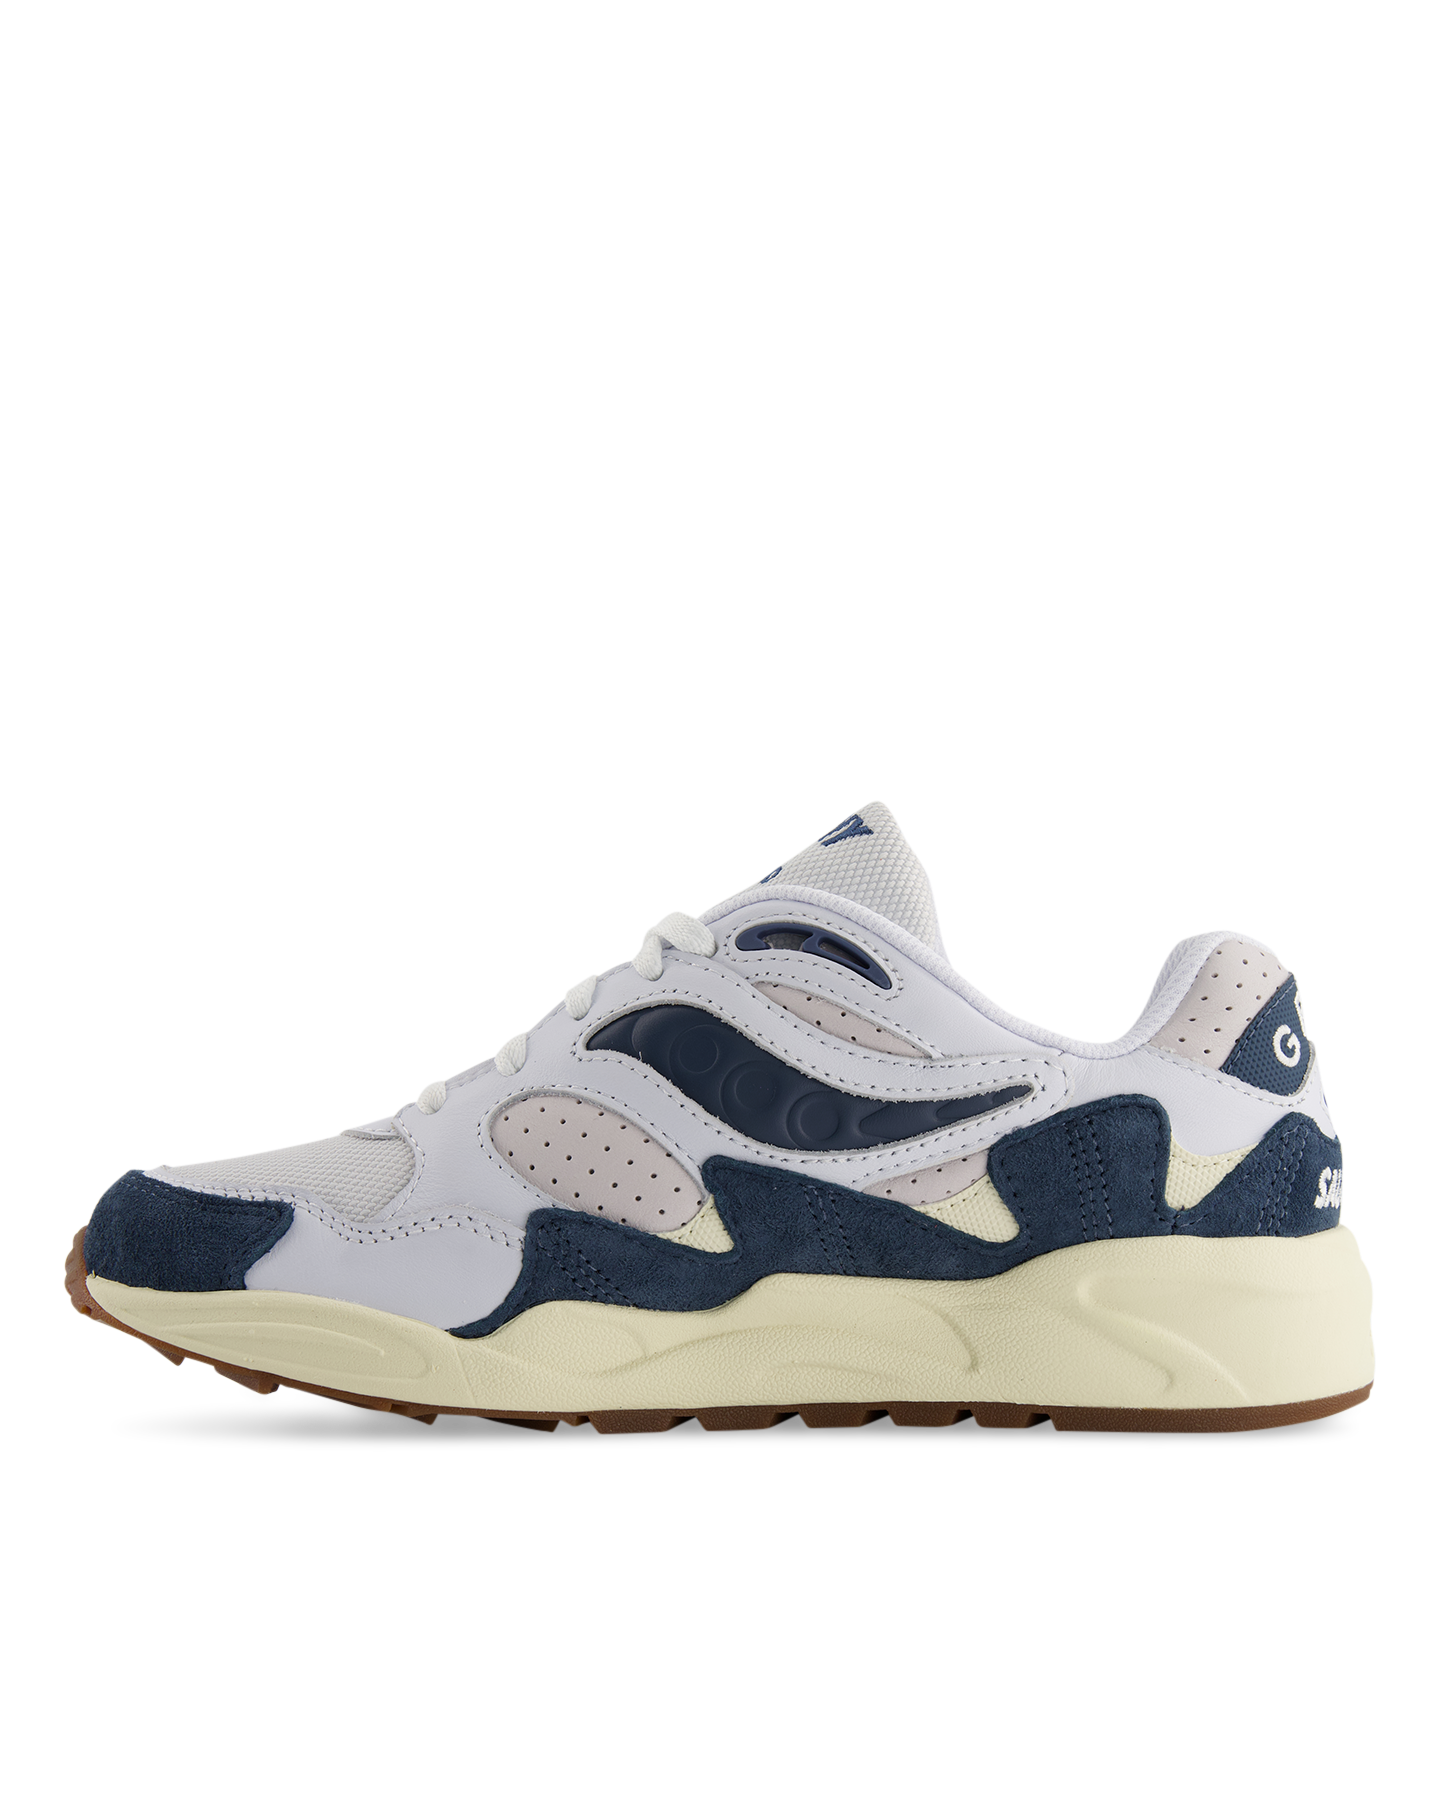 Saucony Grid Shadow 2 - White/Navy NAVY 4